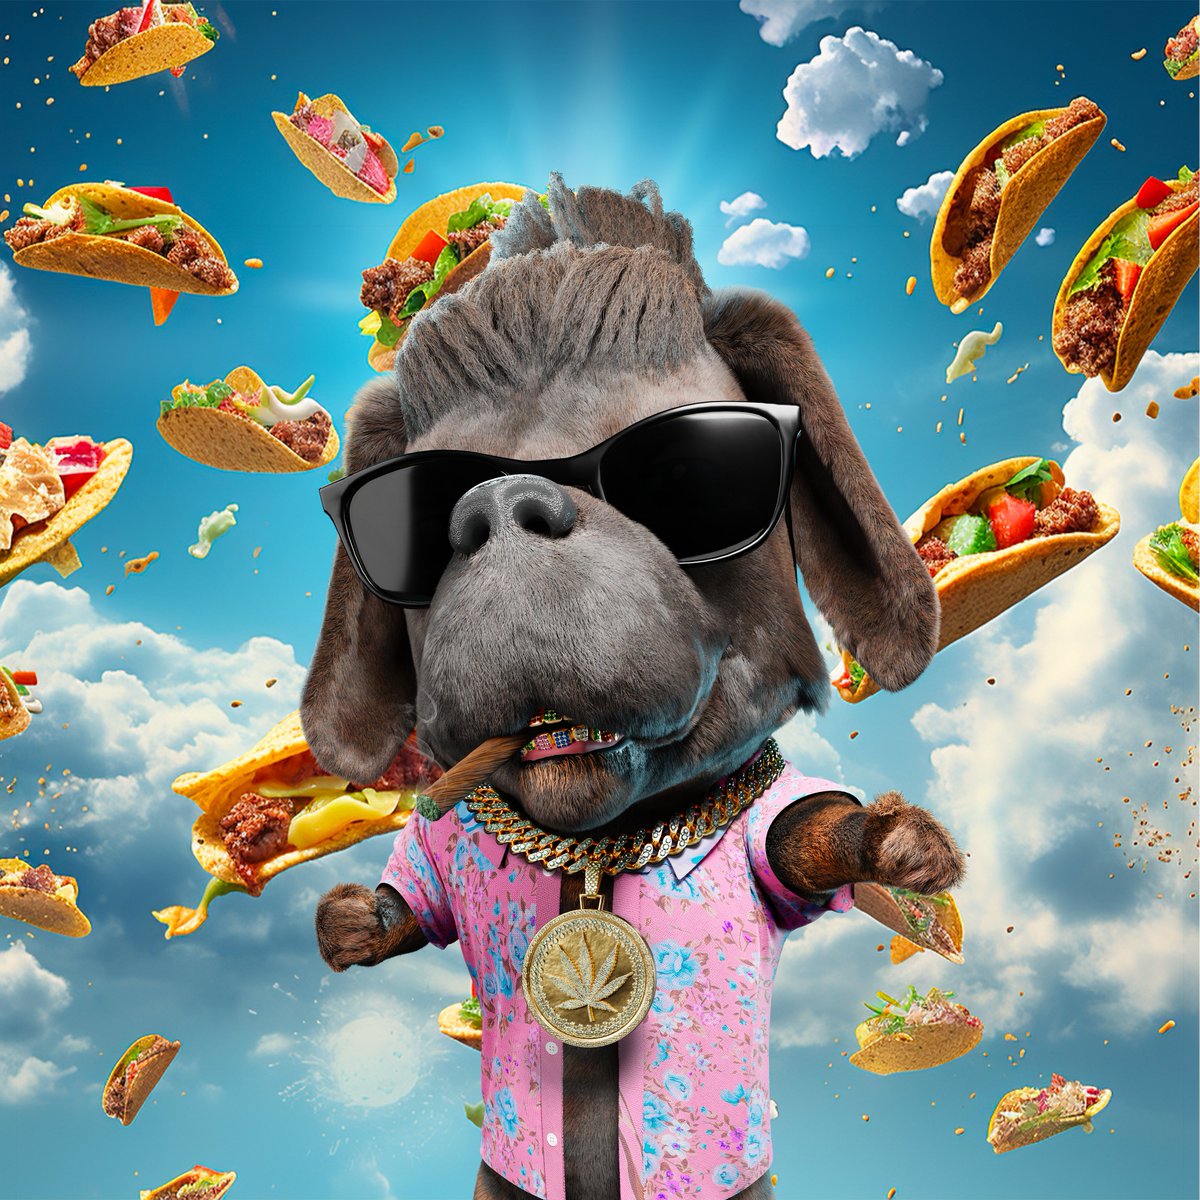 Happy Taco Tuesday @WildWildDogs 😎🌮 Let's have a fantastic day ☀️💛 #NFTCommunity #NFTCollection #NFTProjects #NFTFam #NFTs #NFT #NFTArtists #NFTArts #Web3gaming